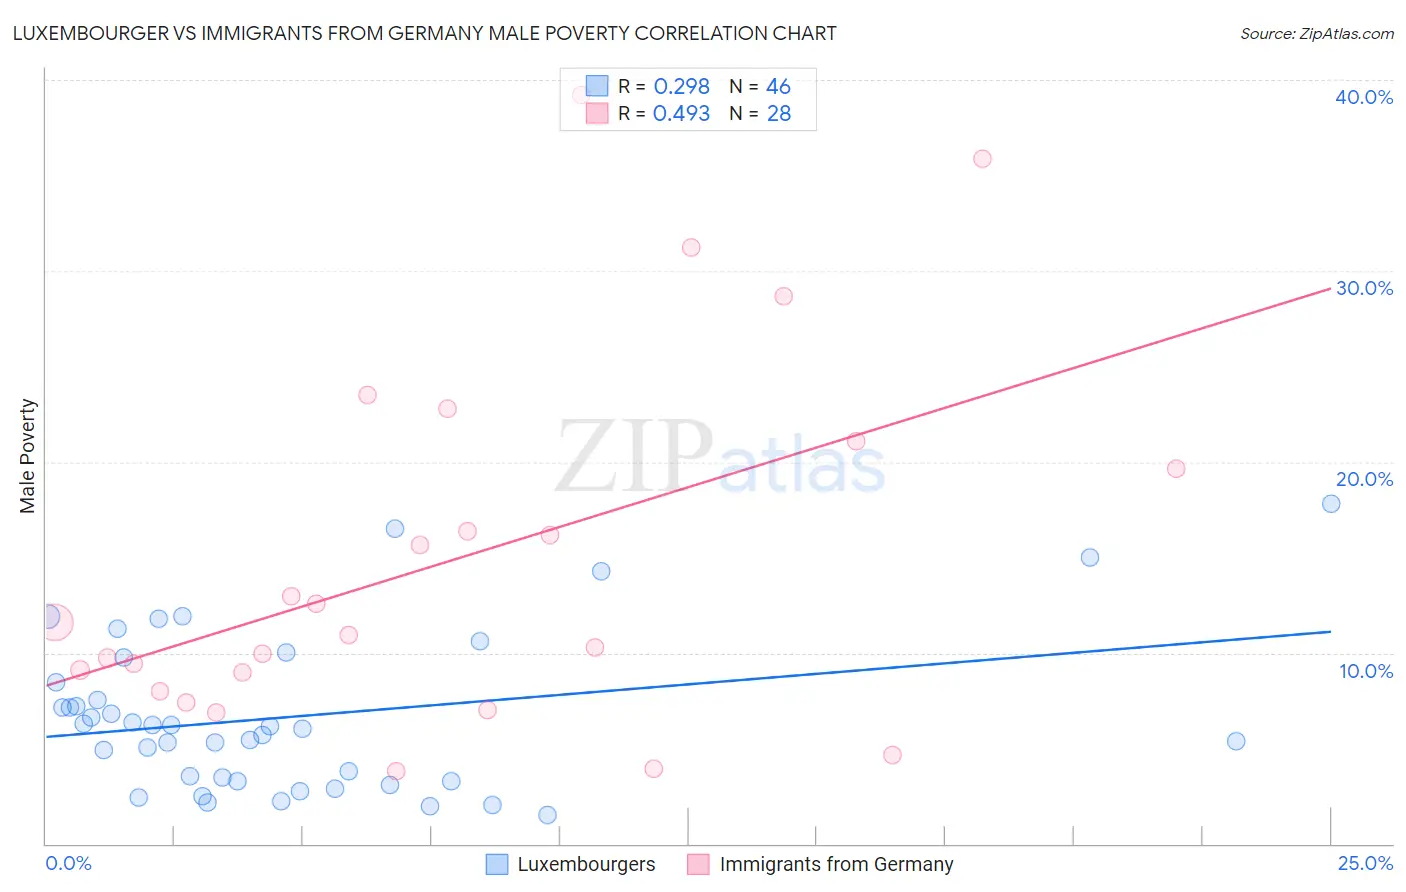 Luxembourger vs Immigrants from Germany Male Poverty